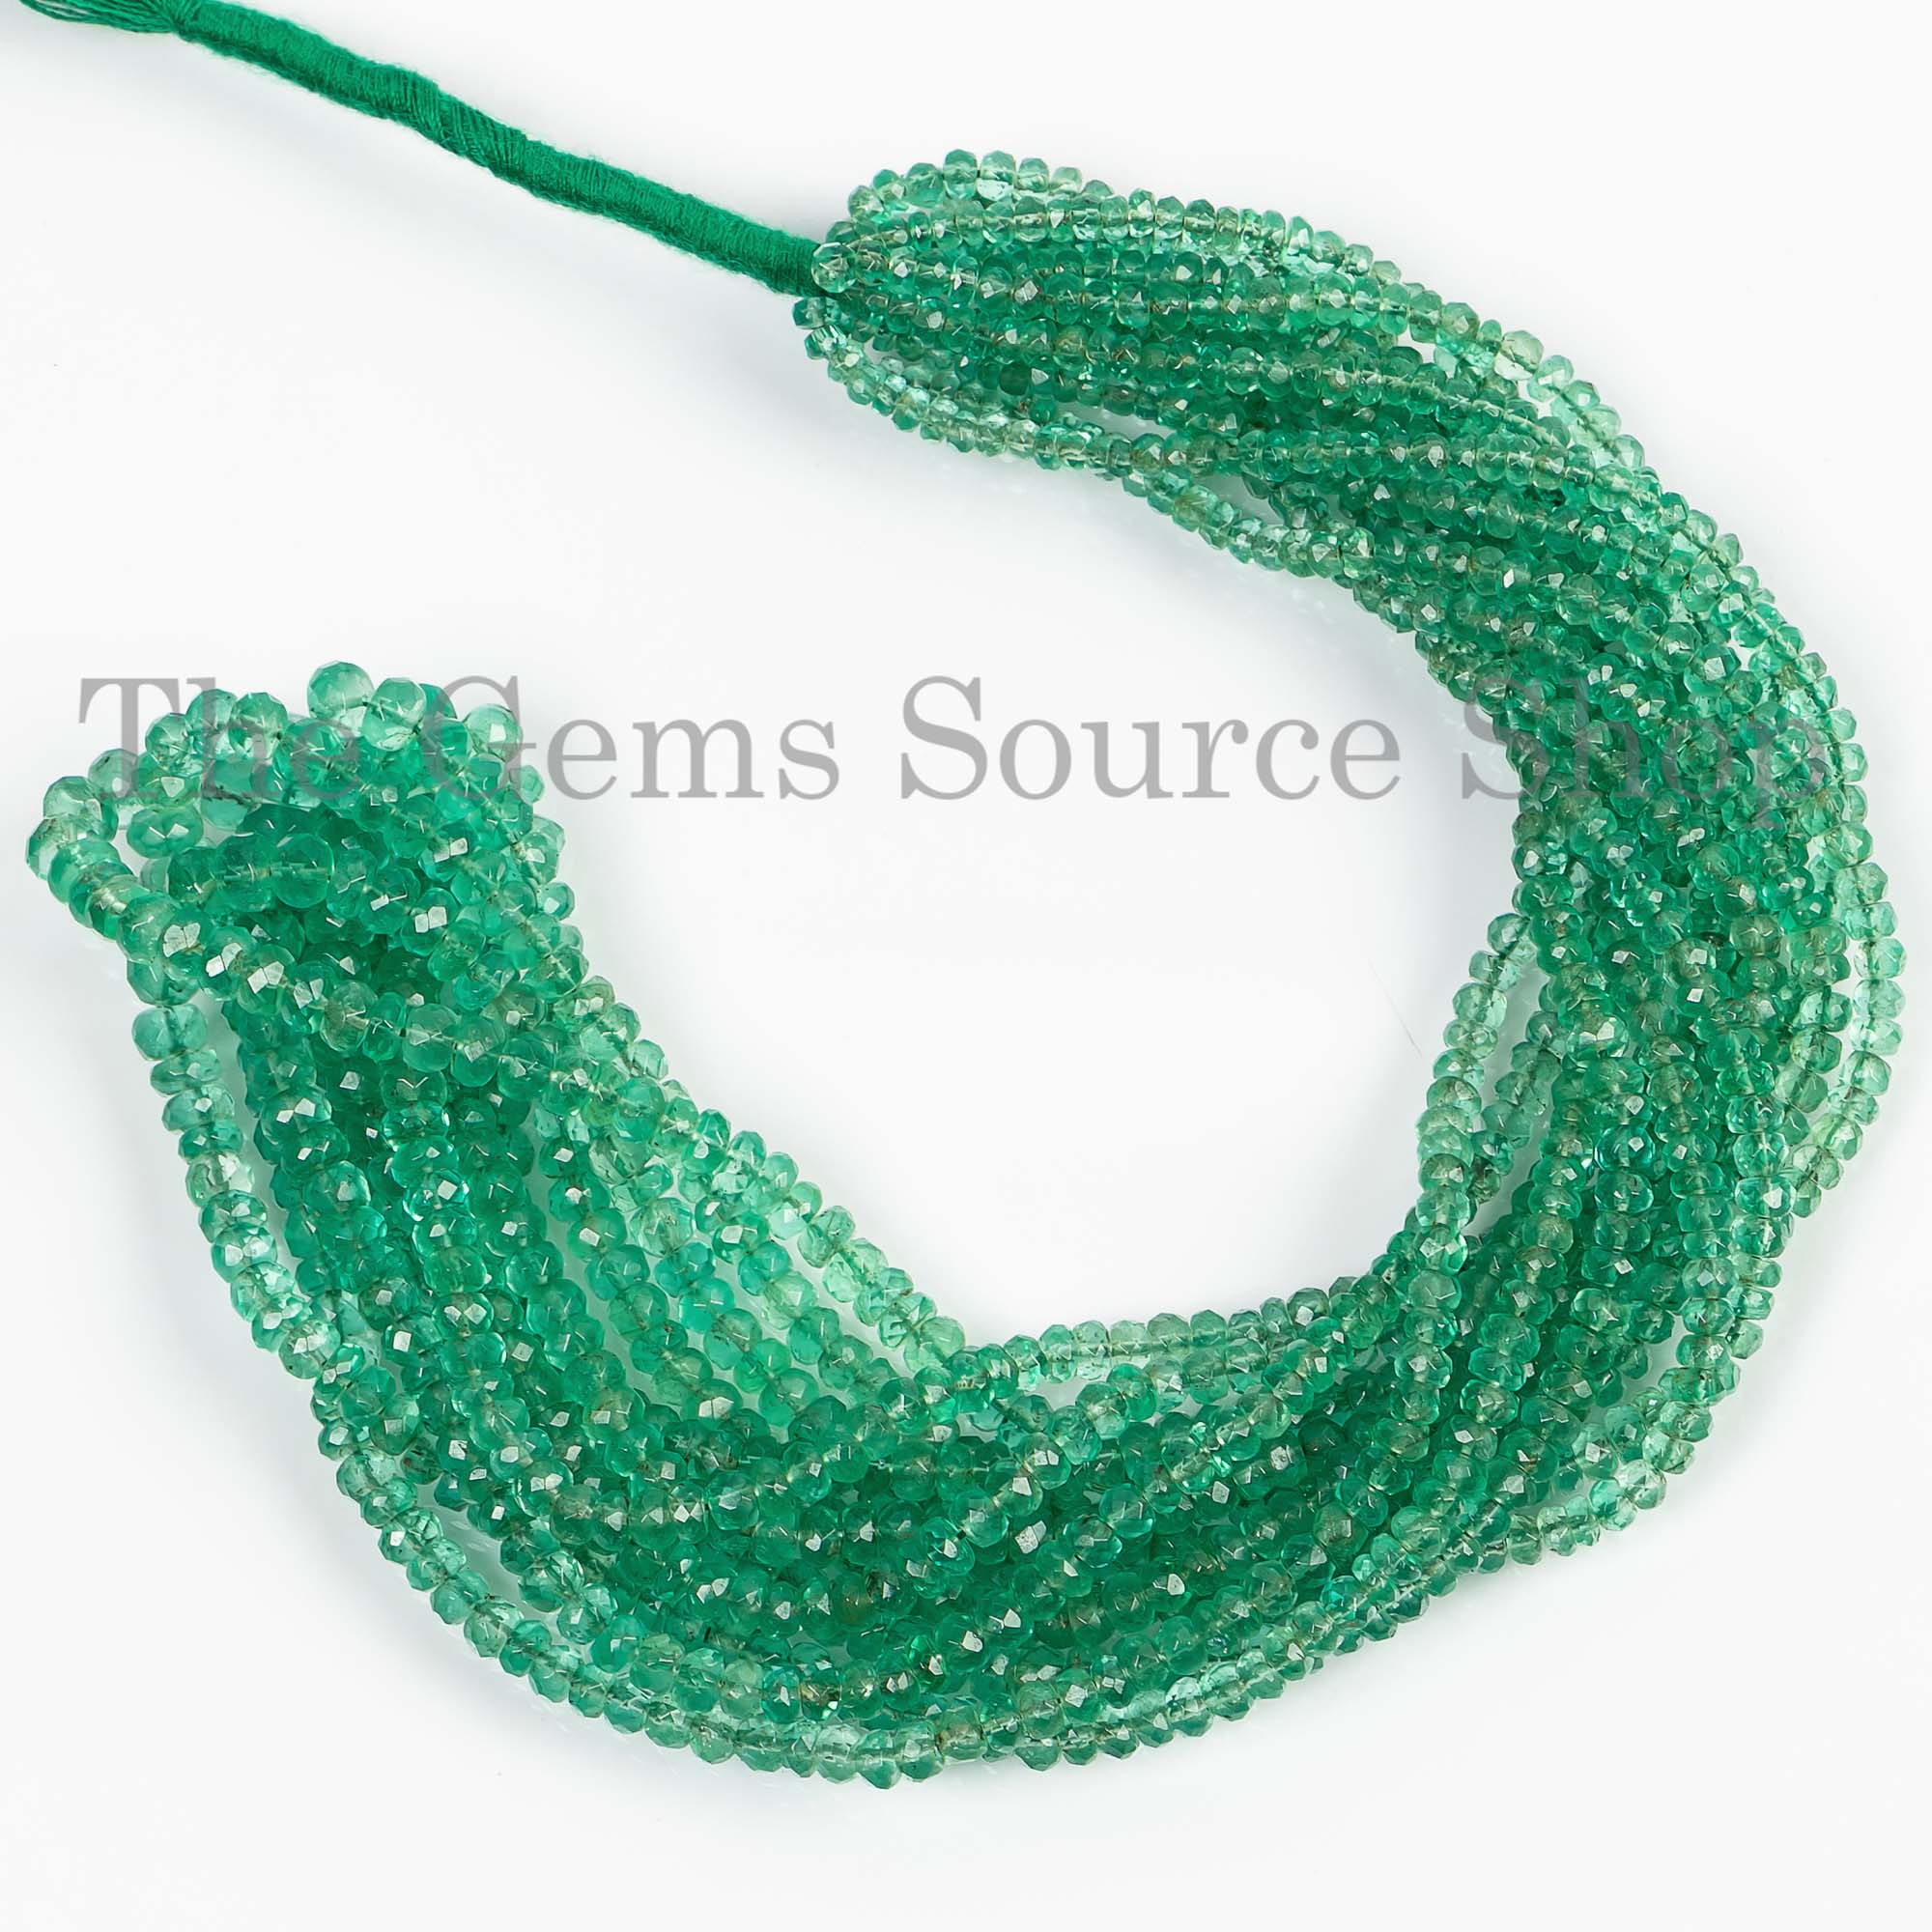 2-5mm Natural Emerald Faceted Rondelle, Wholesale Loose Gemstone Beads, TGS-4492